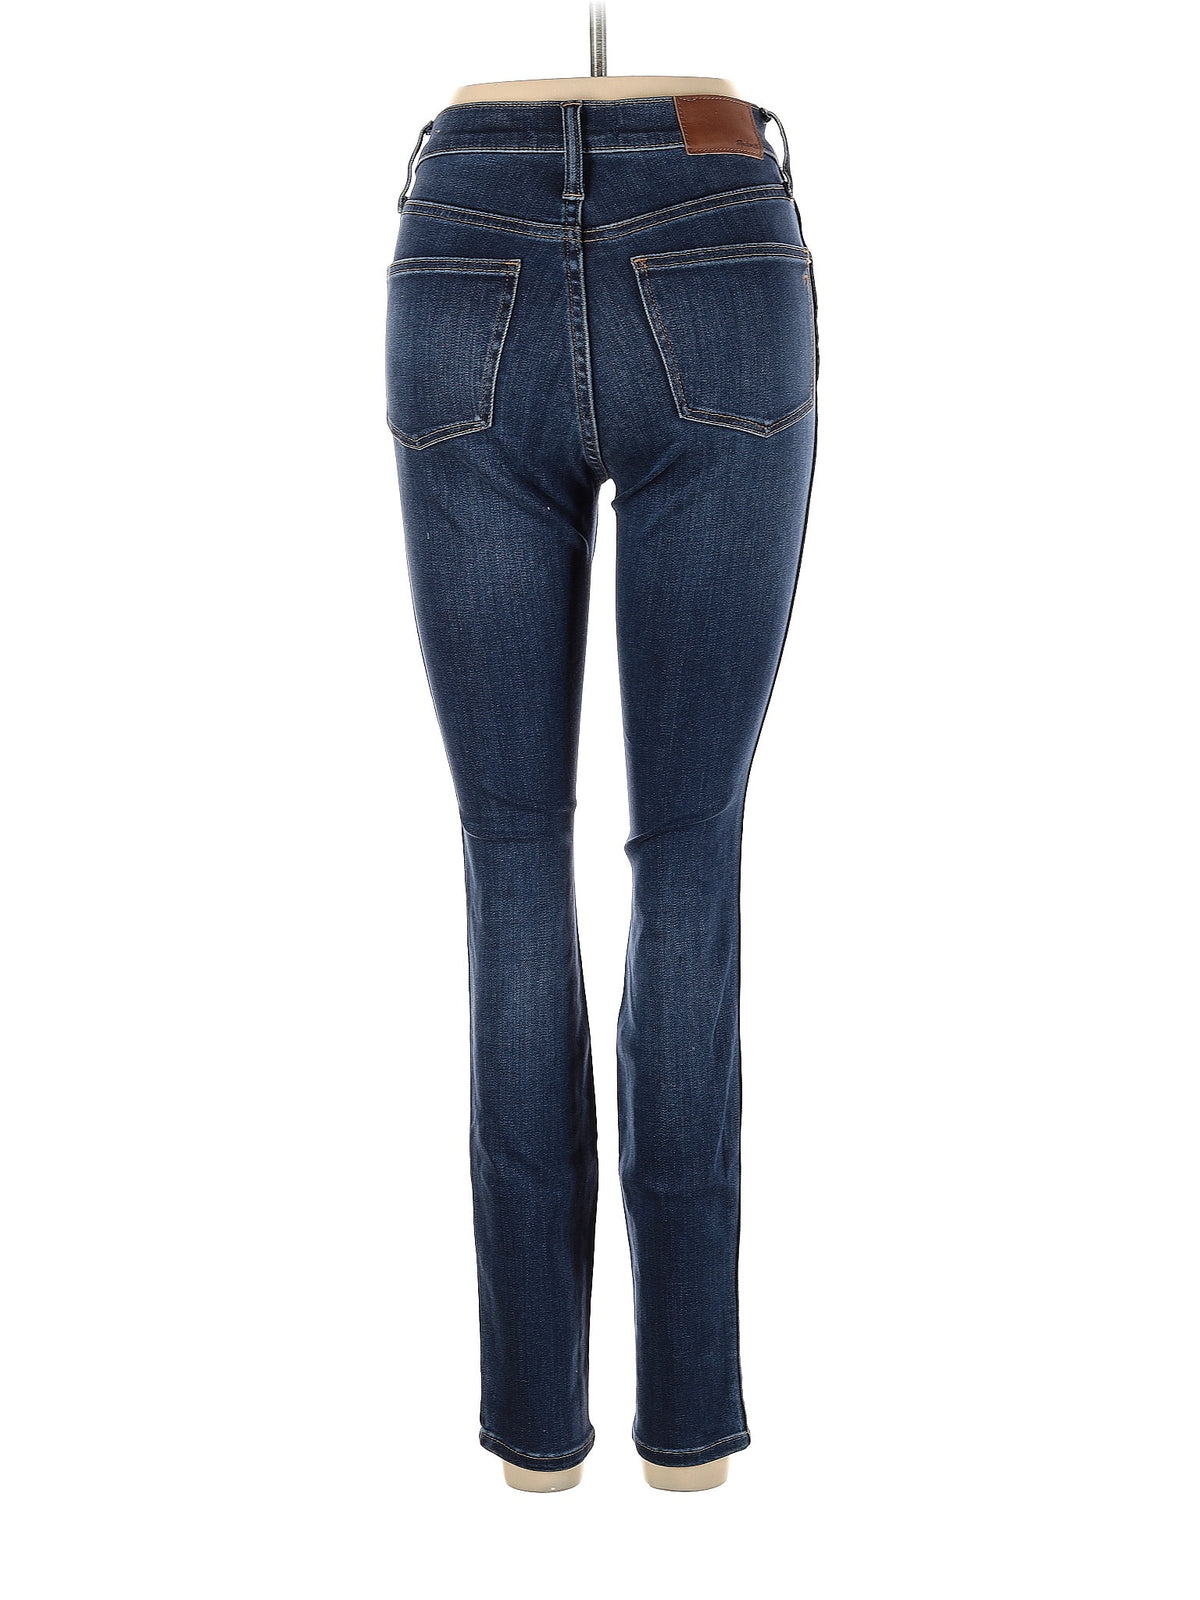 Mid-Rise Skinny Jeans in Medium Wash waist size - 25